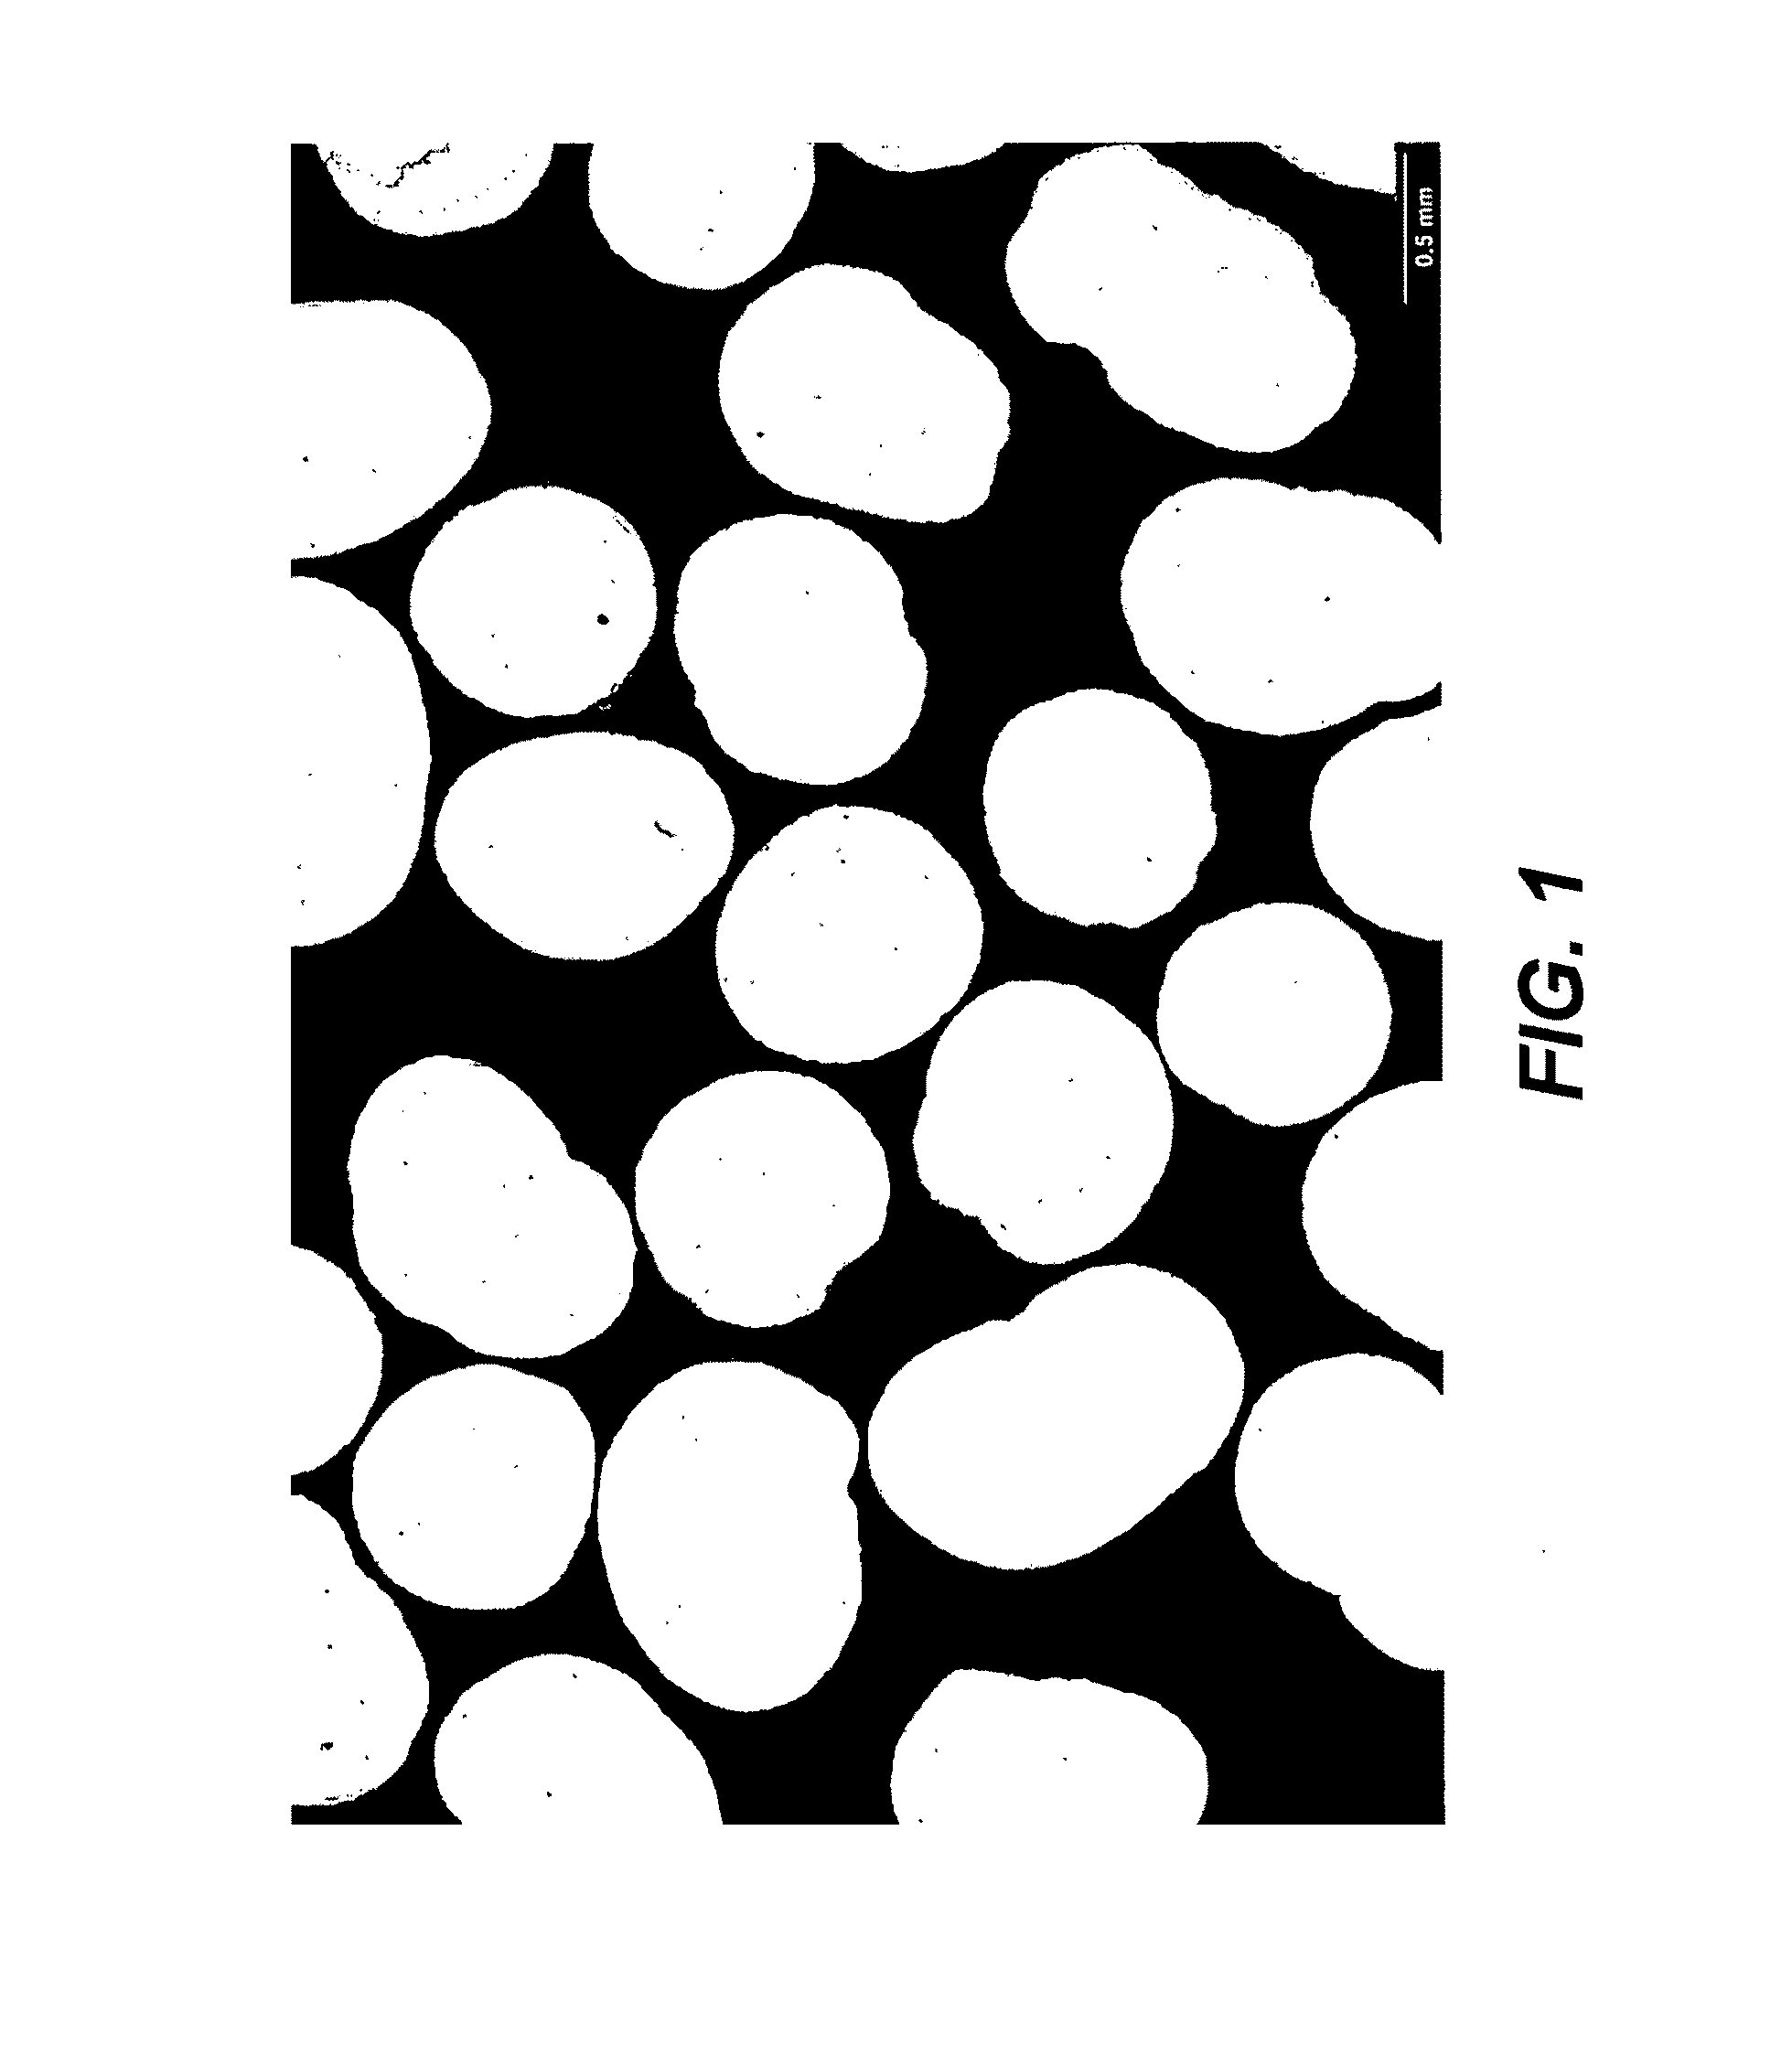 Well treatment operations using spherical cellulosic particulates